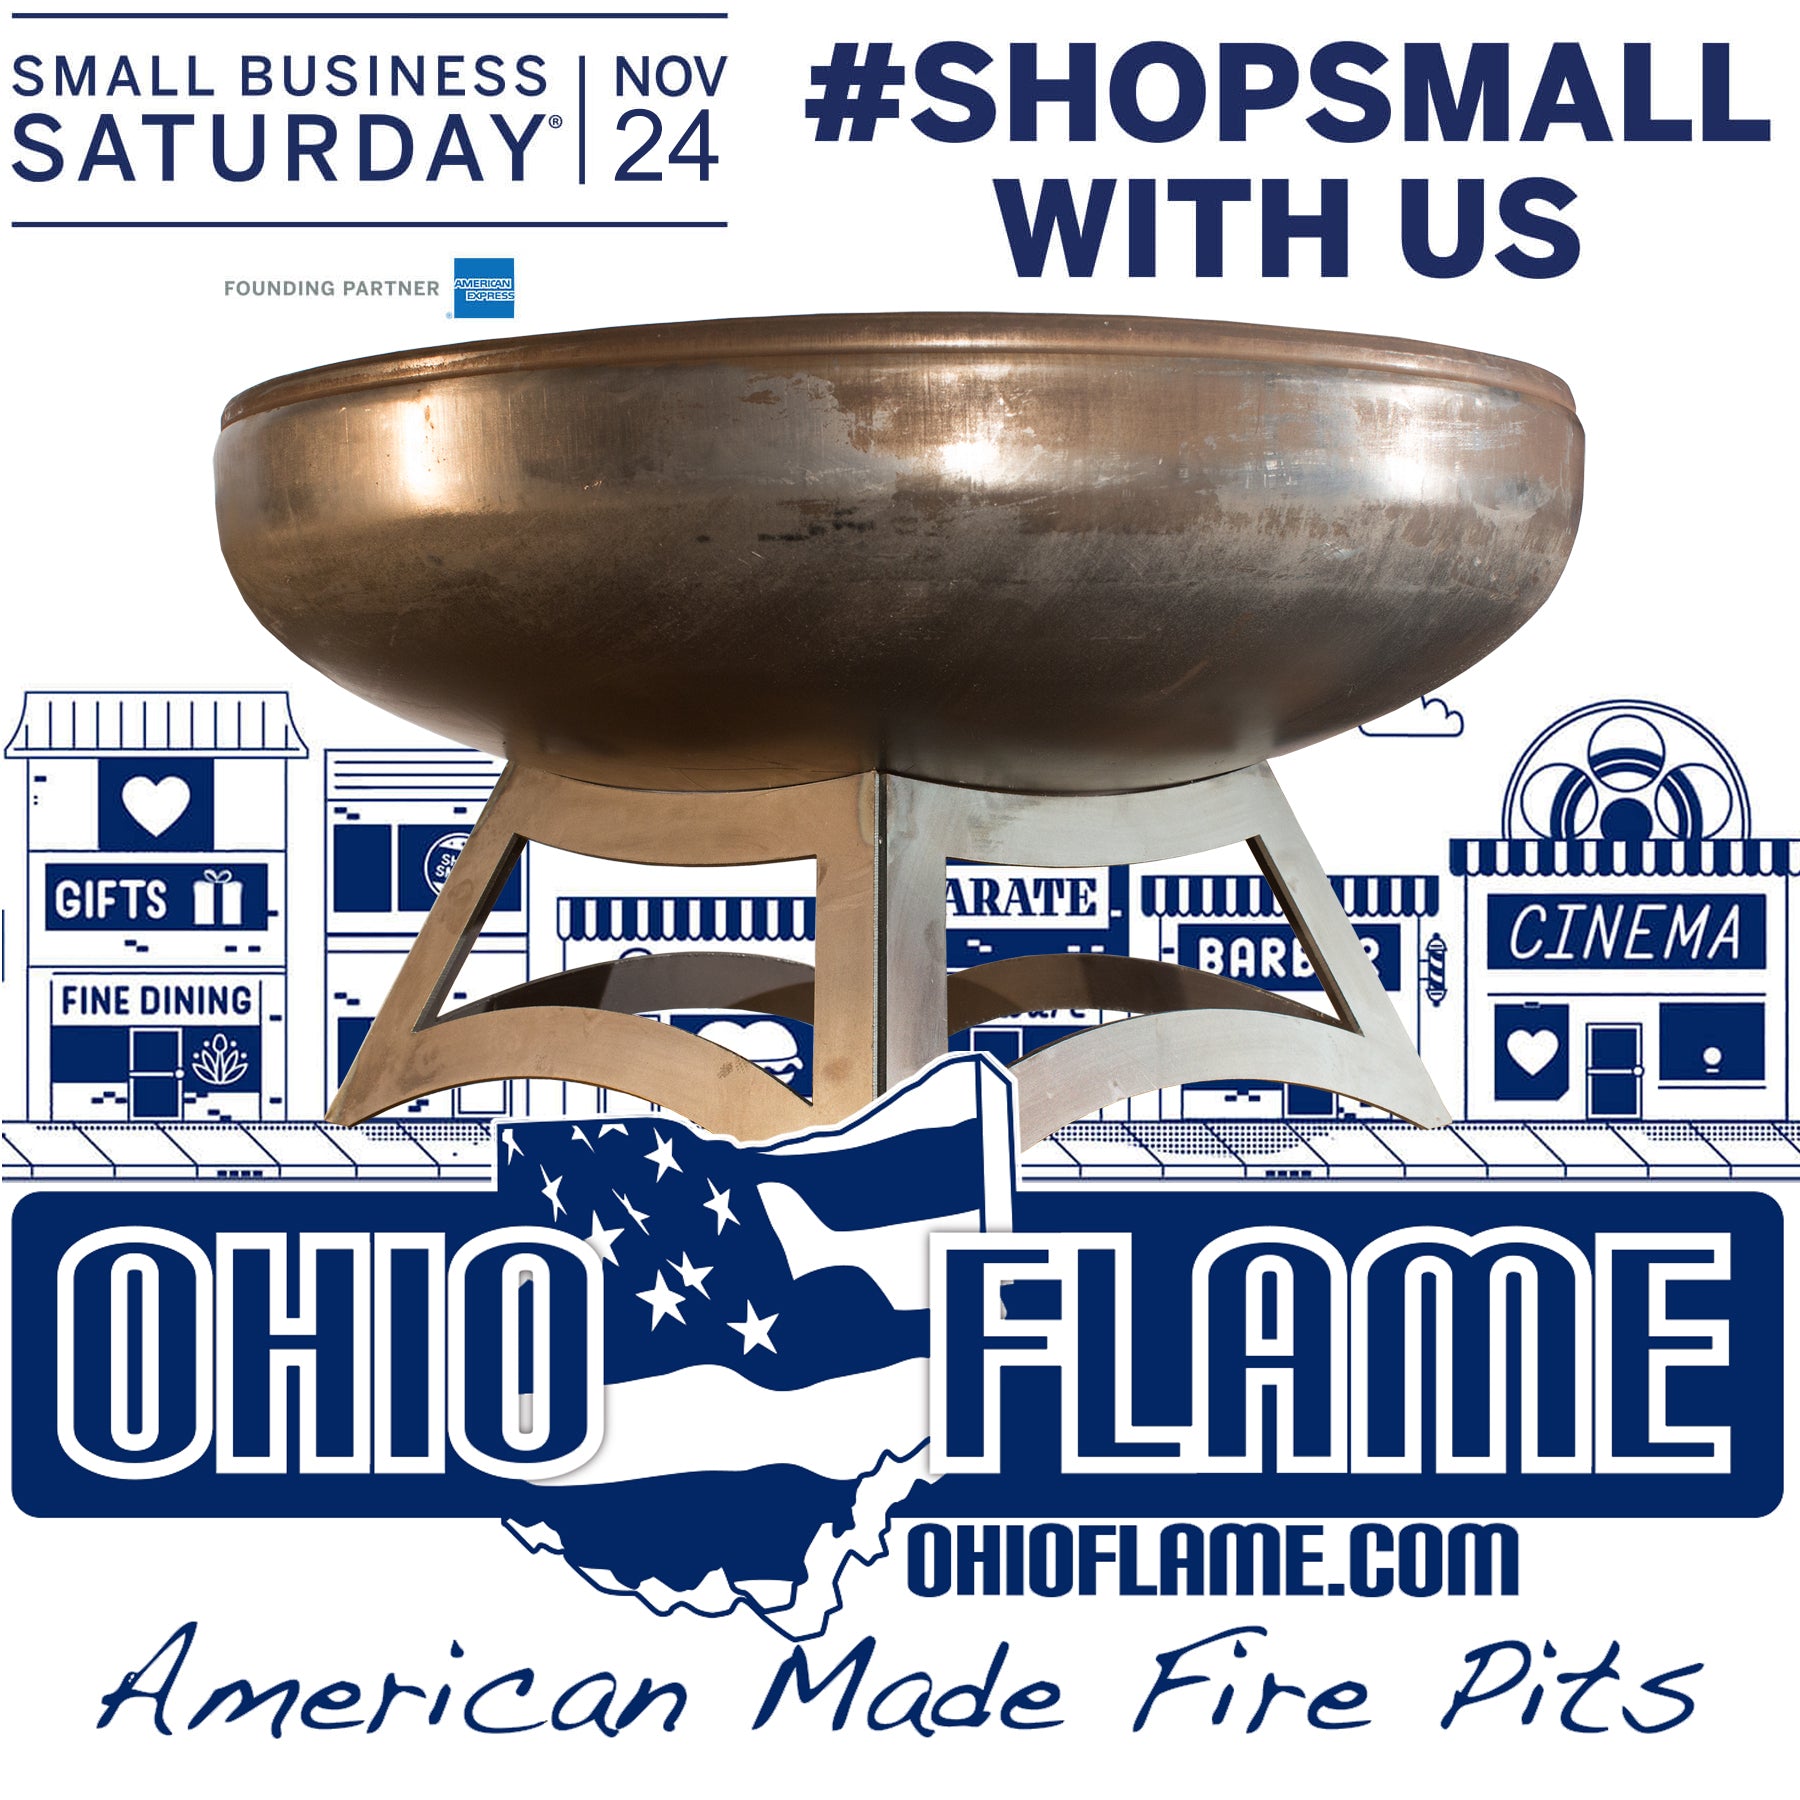 Small Business Weekend at Ohio Flame